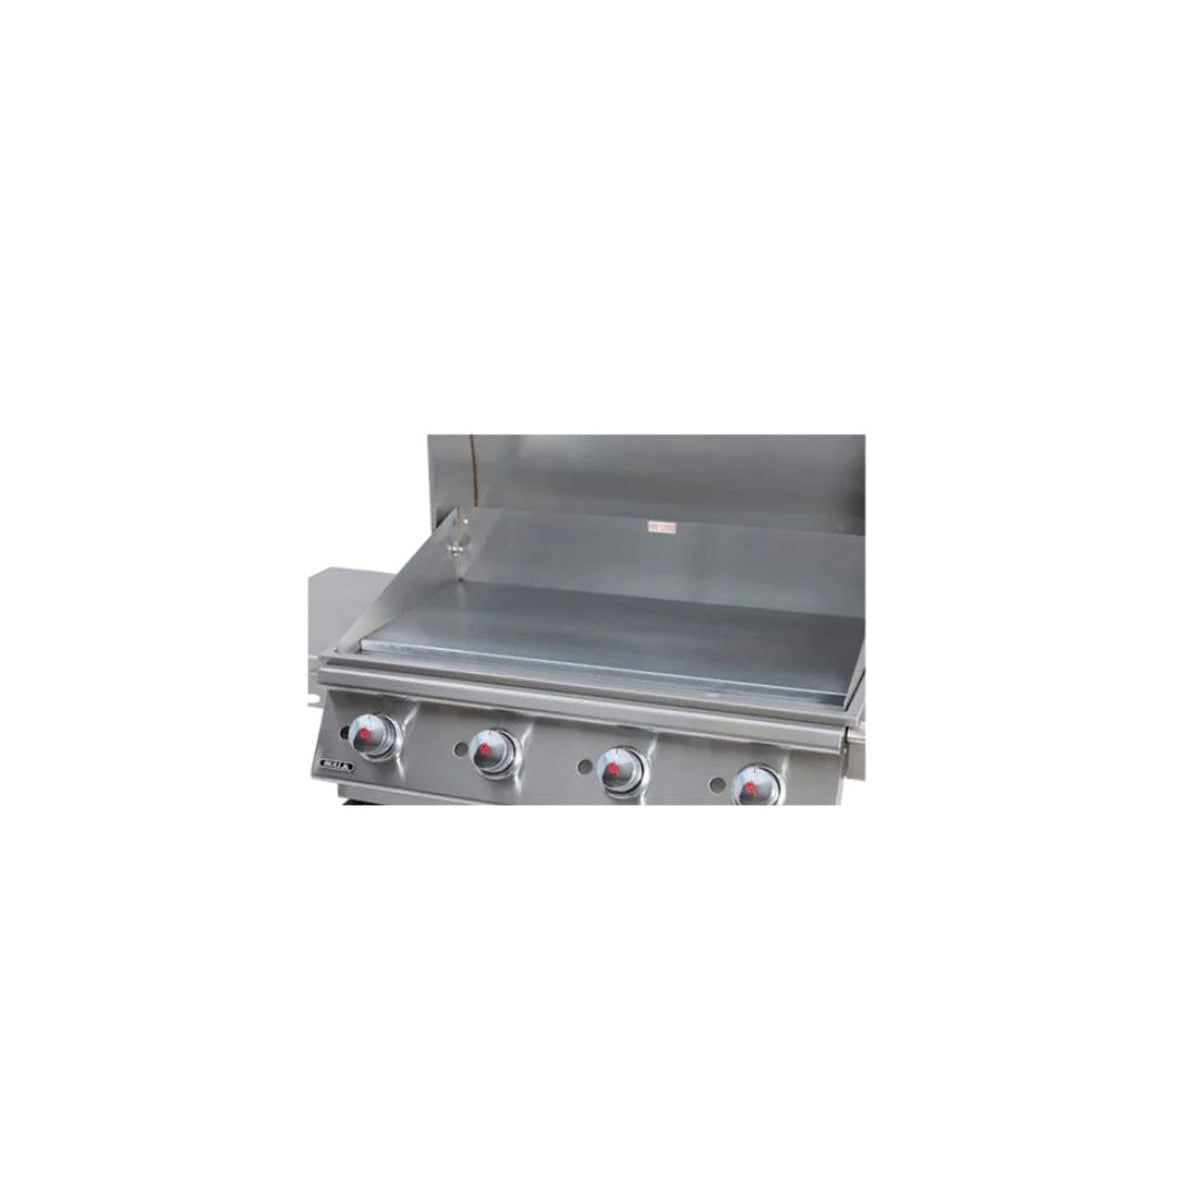 Bull Stockman 30 Inch Stainless Steel Built-In Gas Griddle